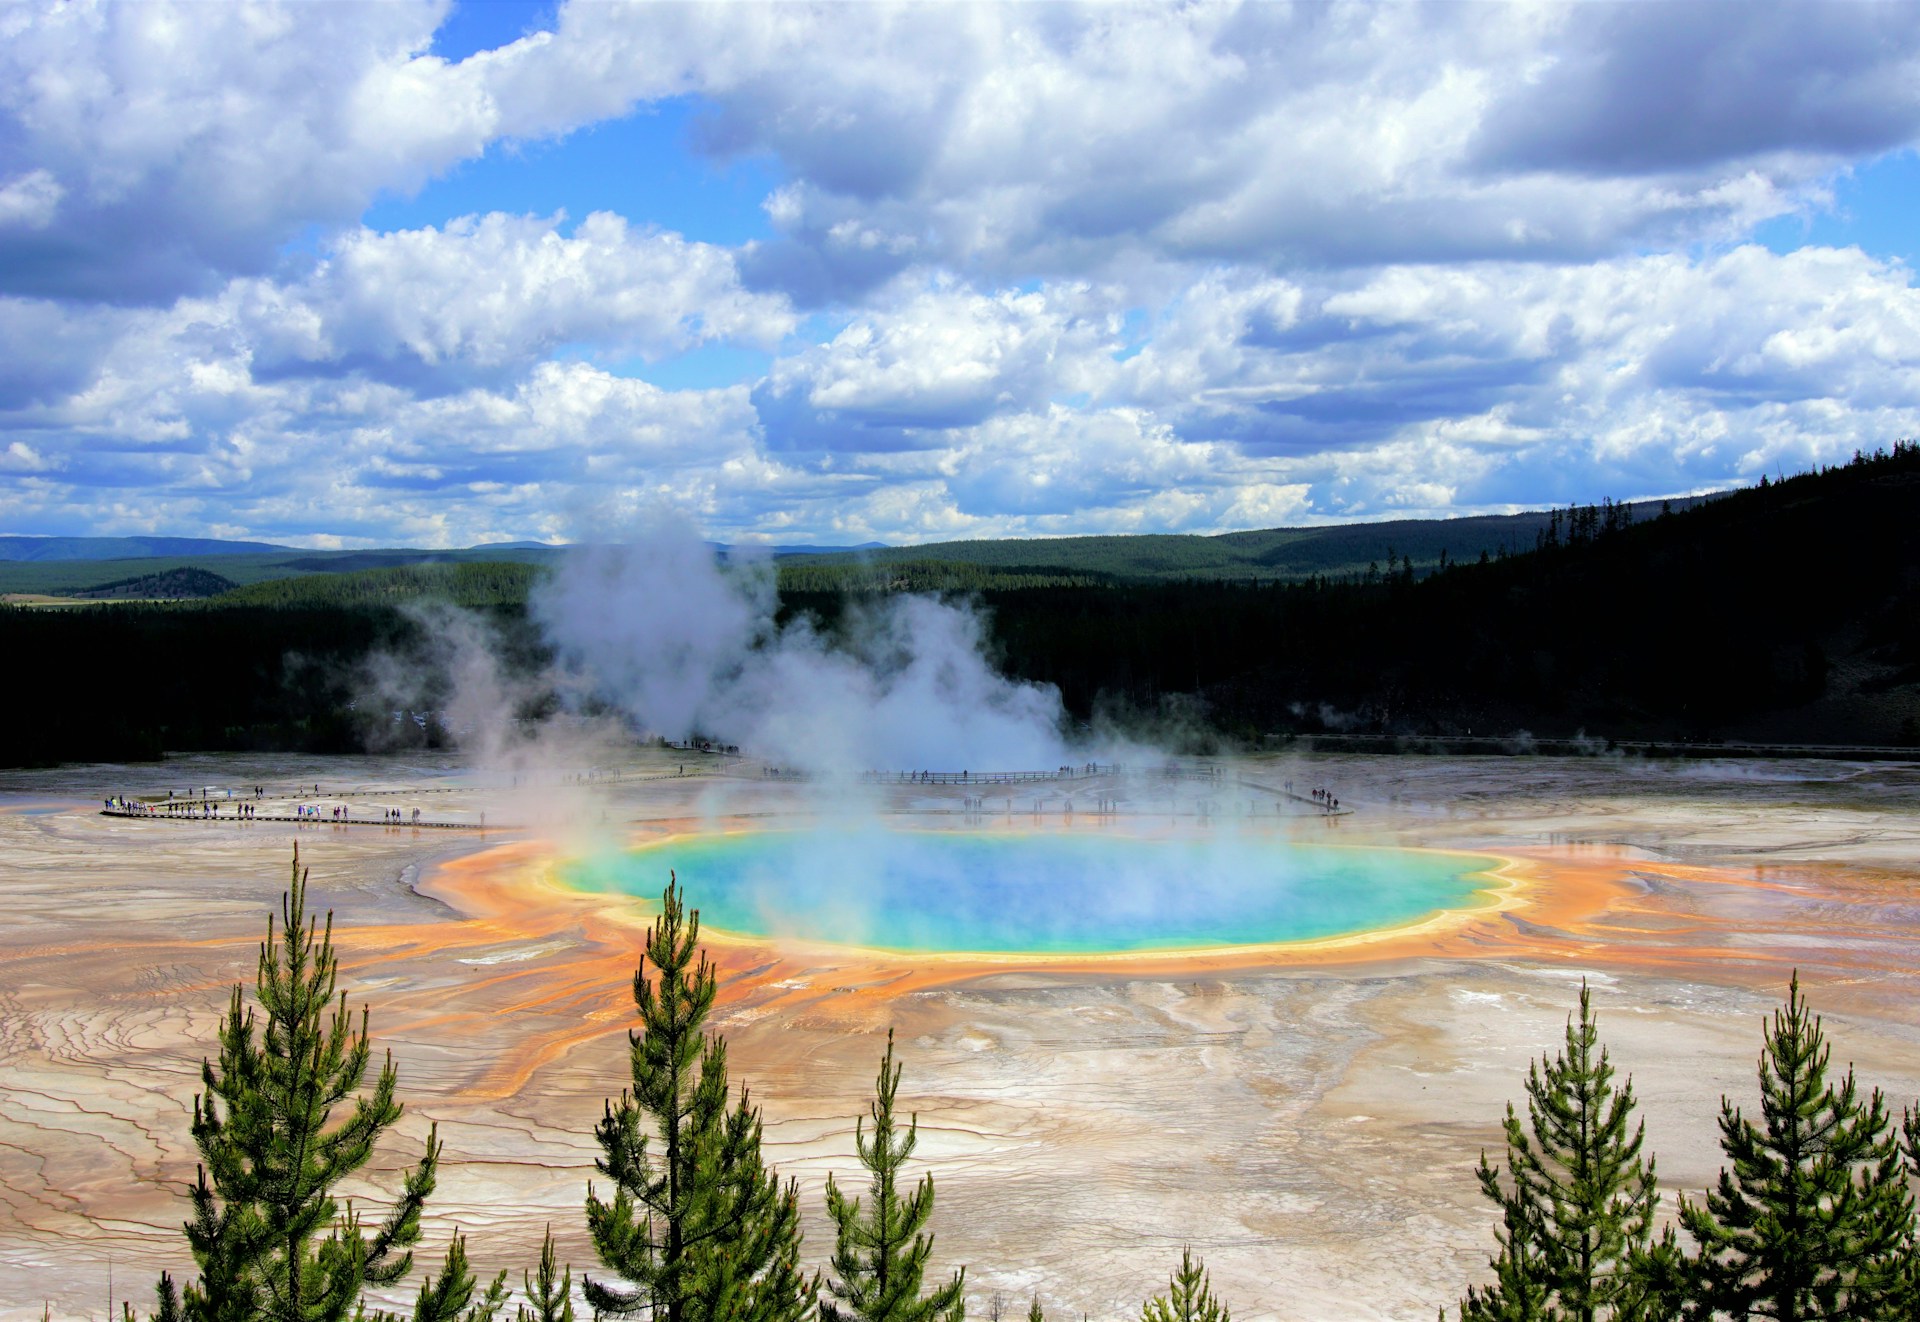 Discovering Yellowstone: A Challenge for Your Park Knowledge